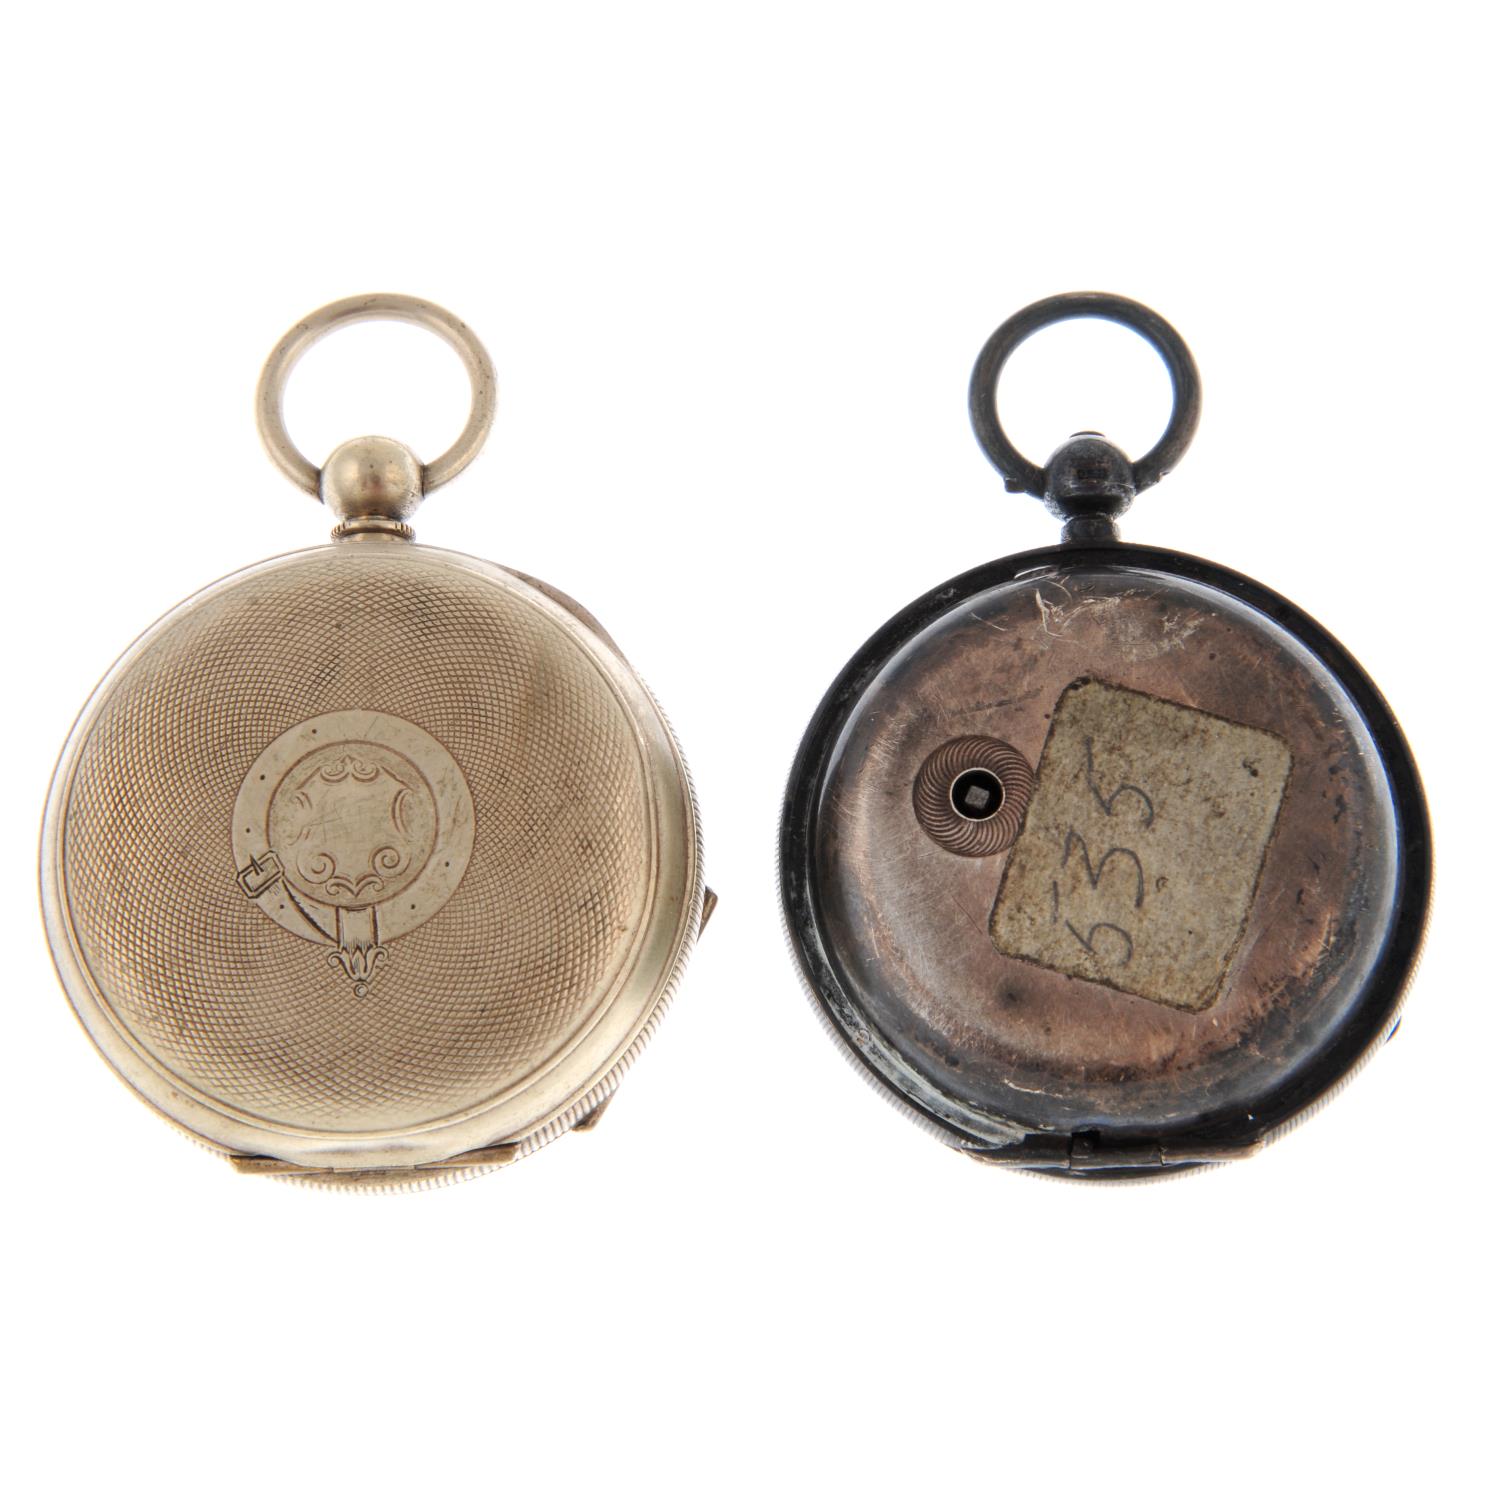 An open face pocket watch. - Image 4 of 4